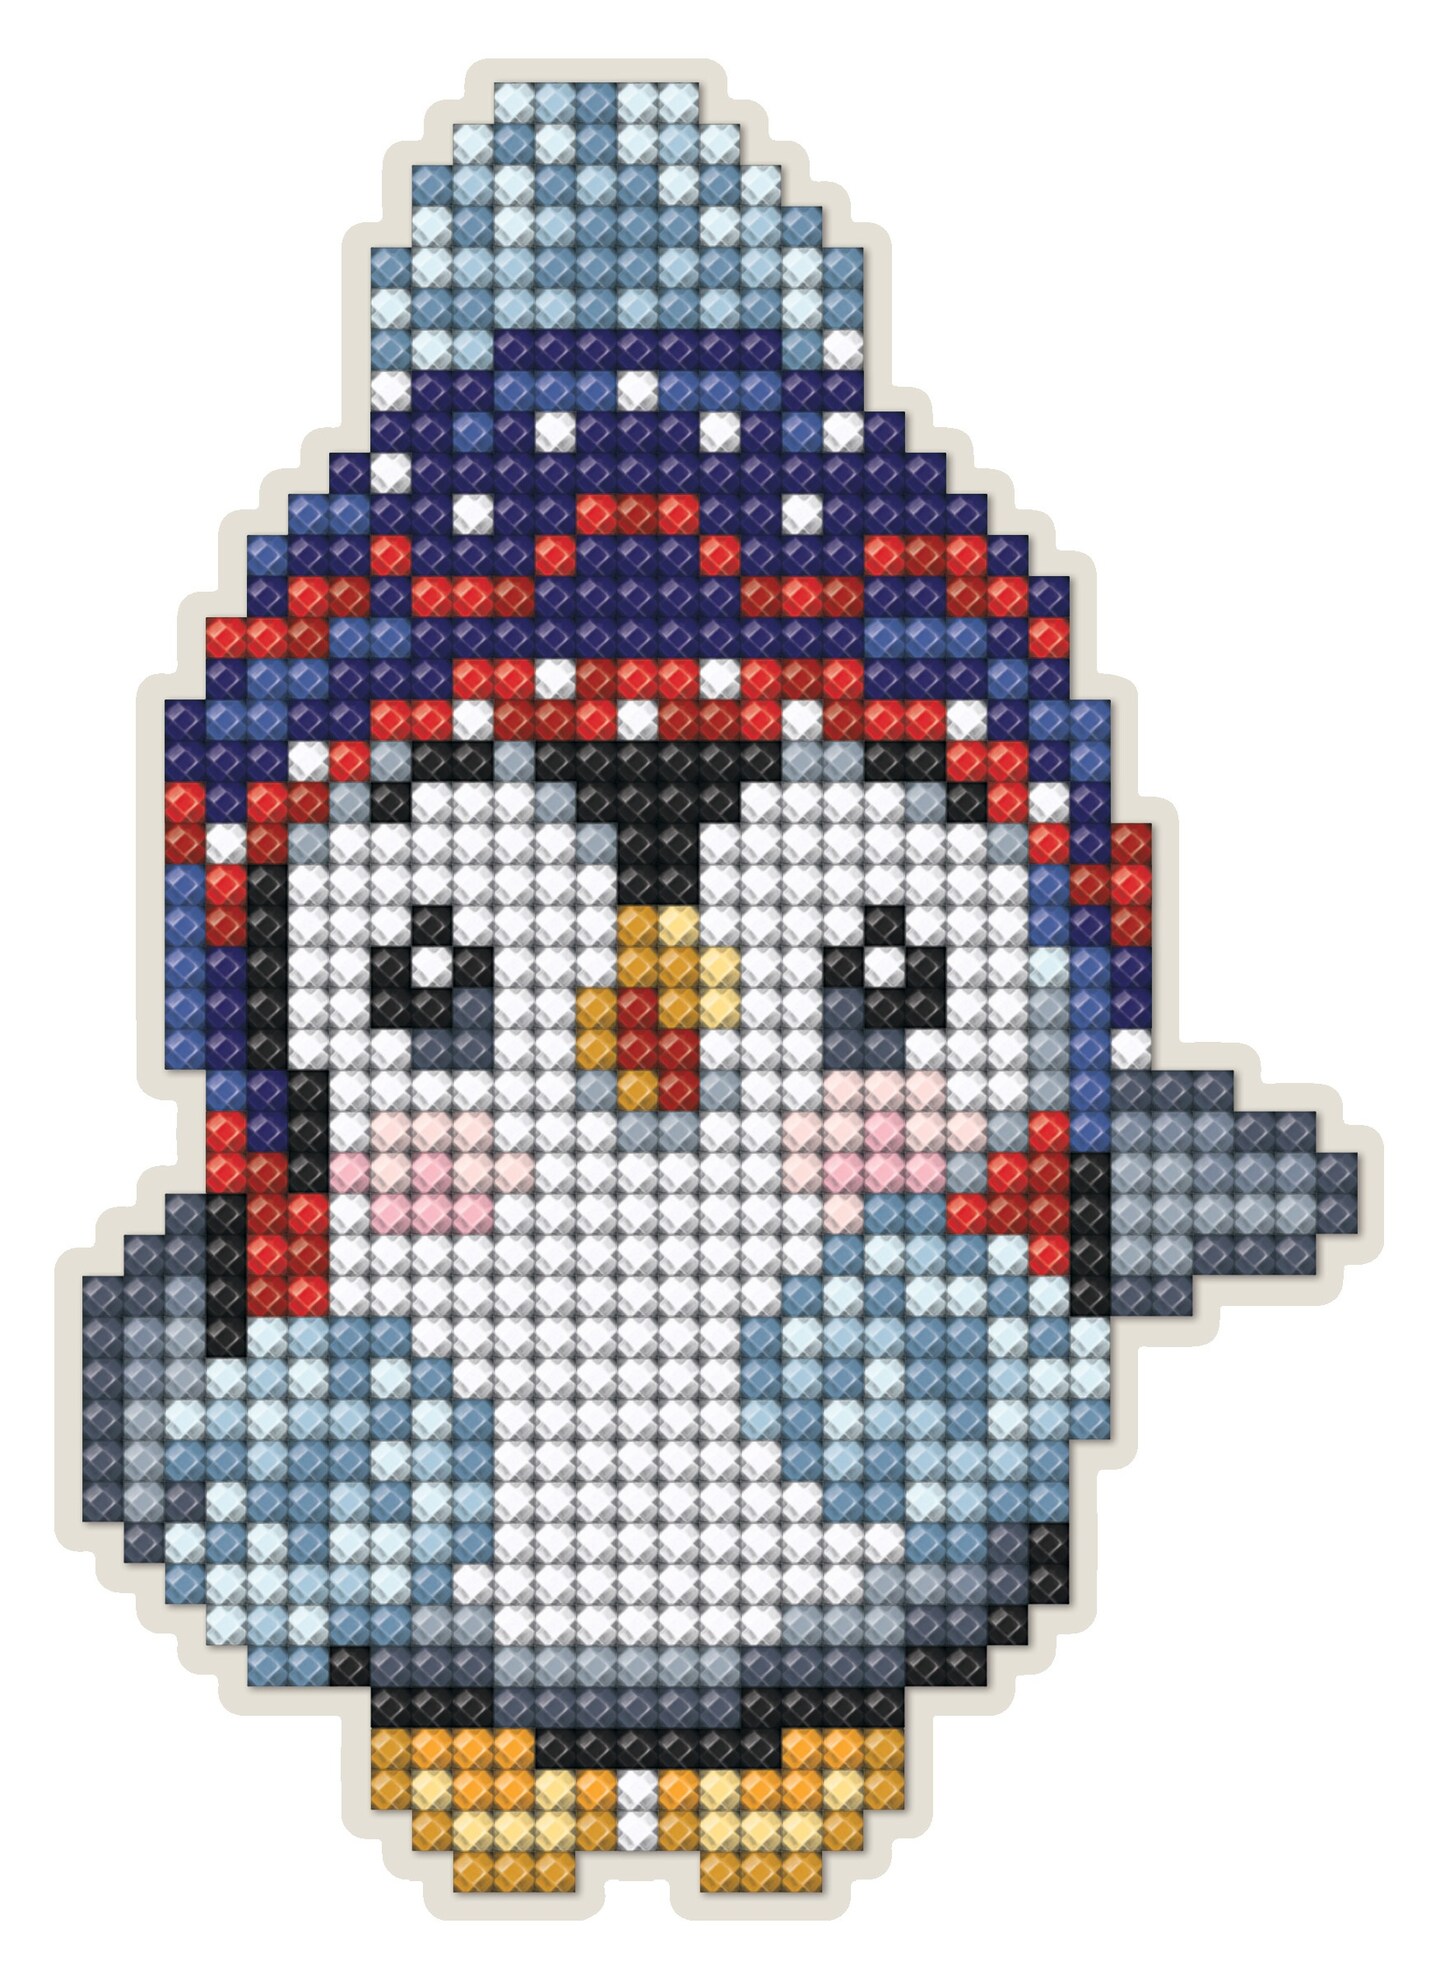 Collection D&#x27;art Diamond Painting Magnet Kit 3&#x22;X4.5&#x22;-Penguin With Hat